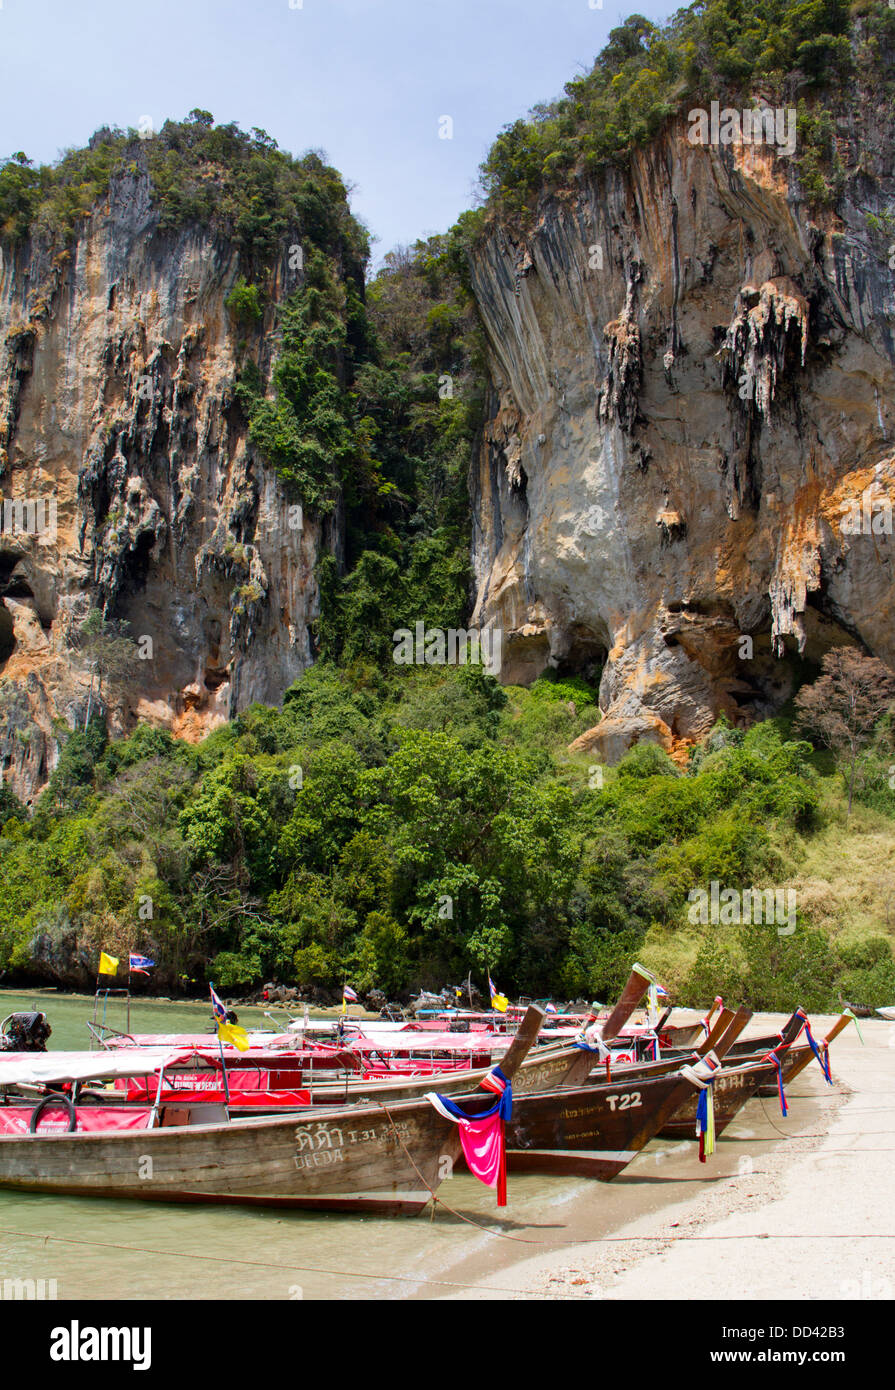 Motorboats line the beach at Hat Ton Sai in Railay. Stock Photo